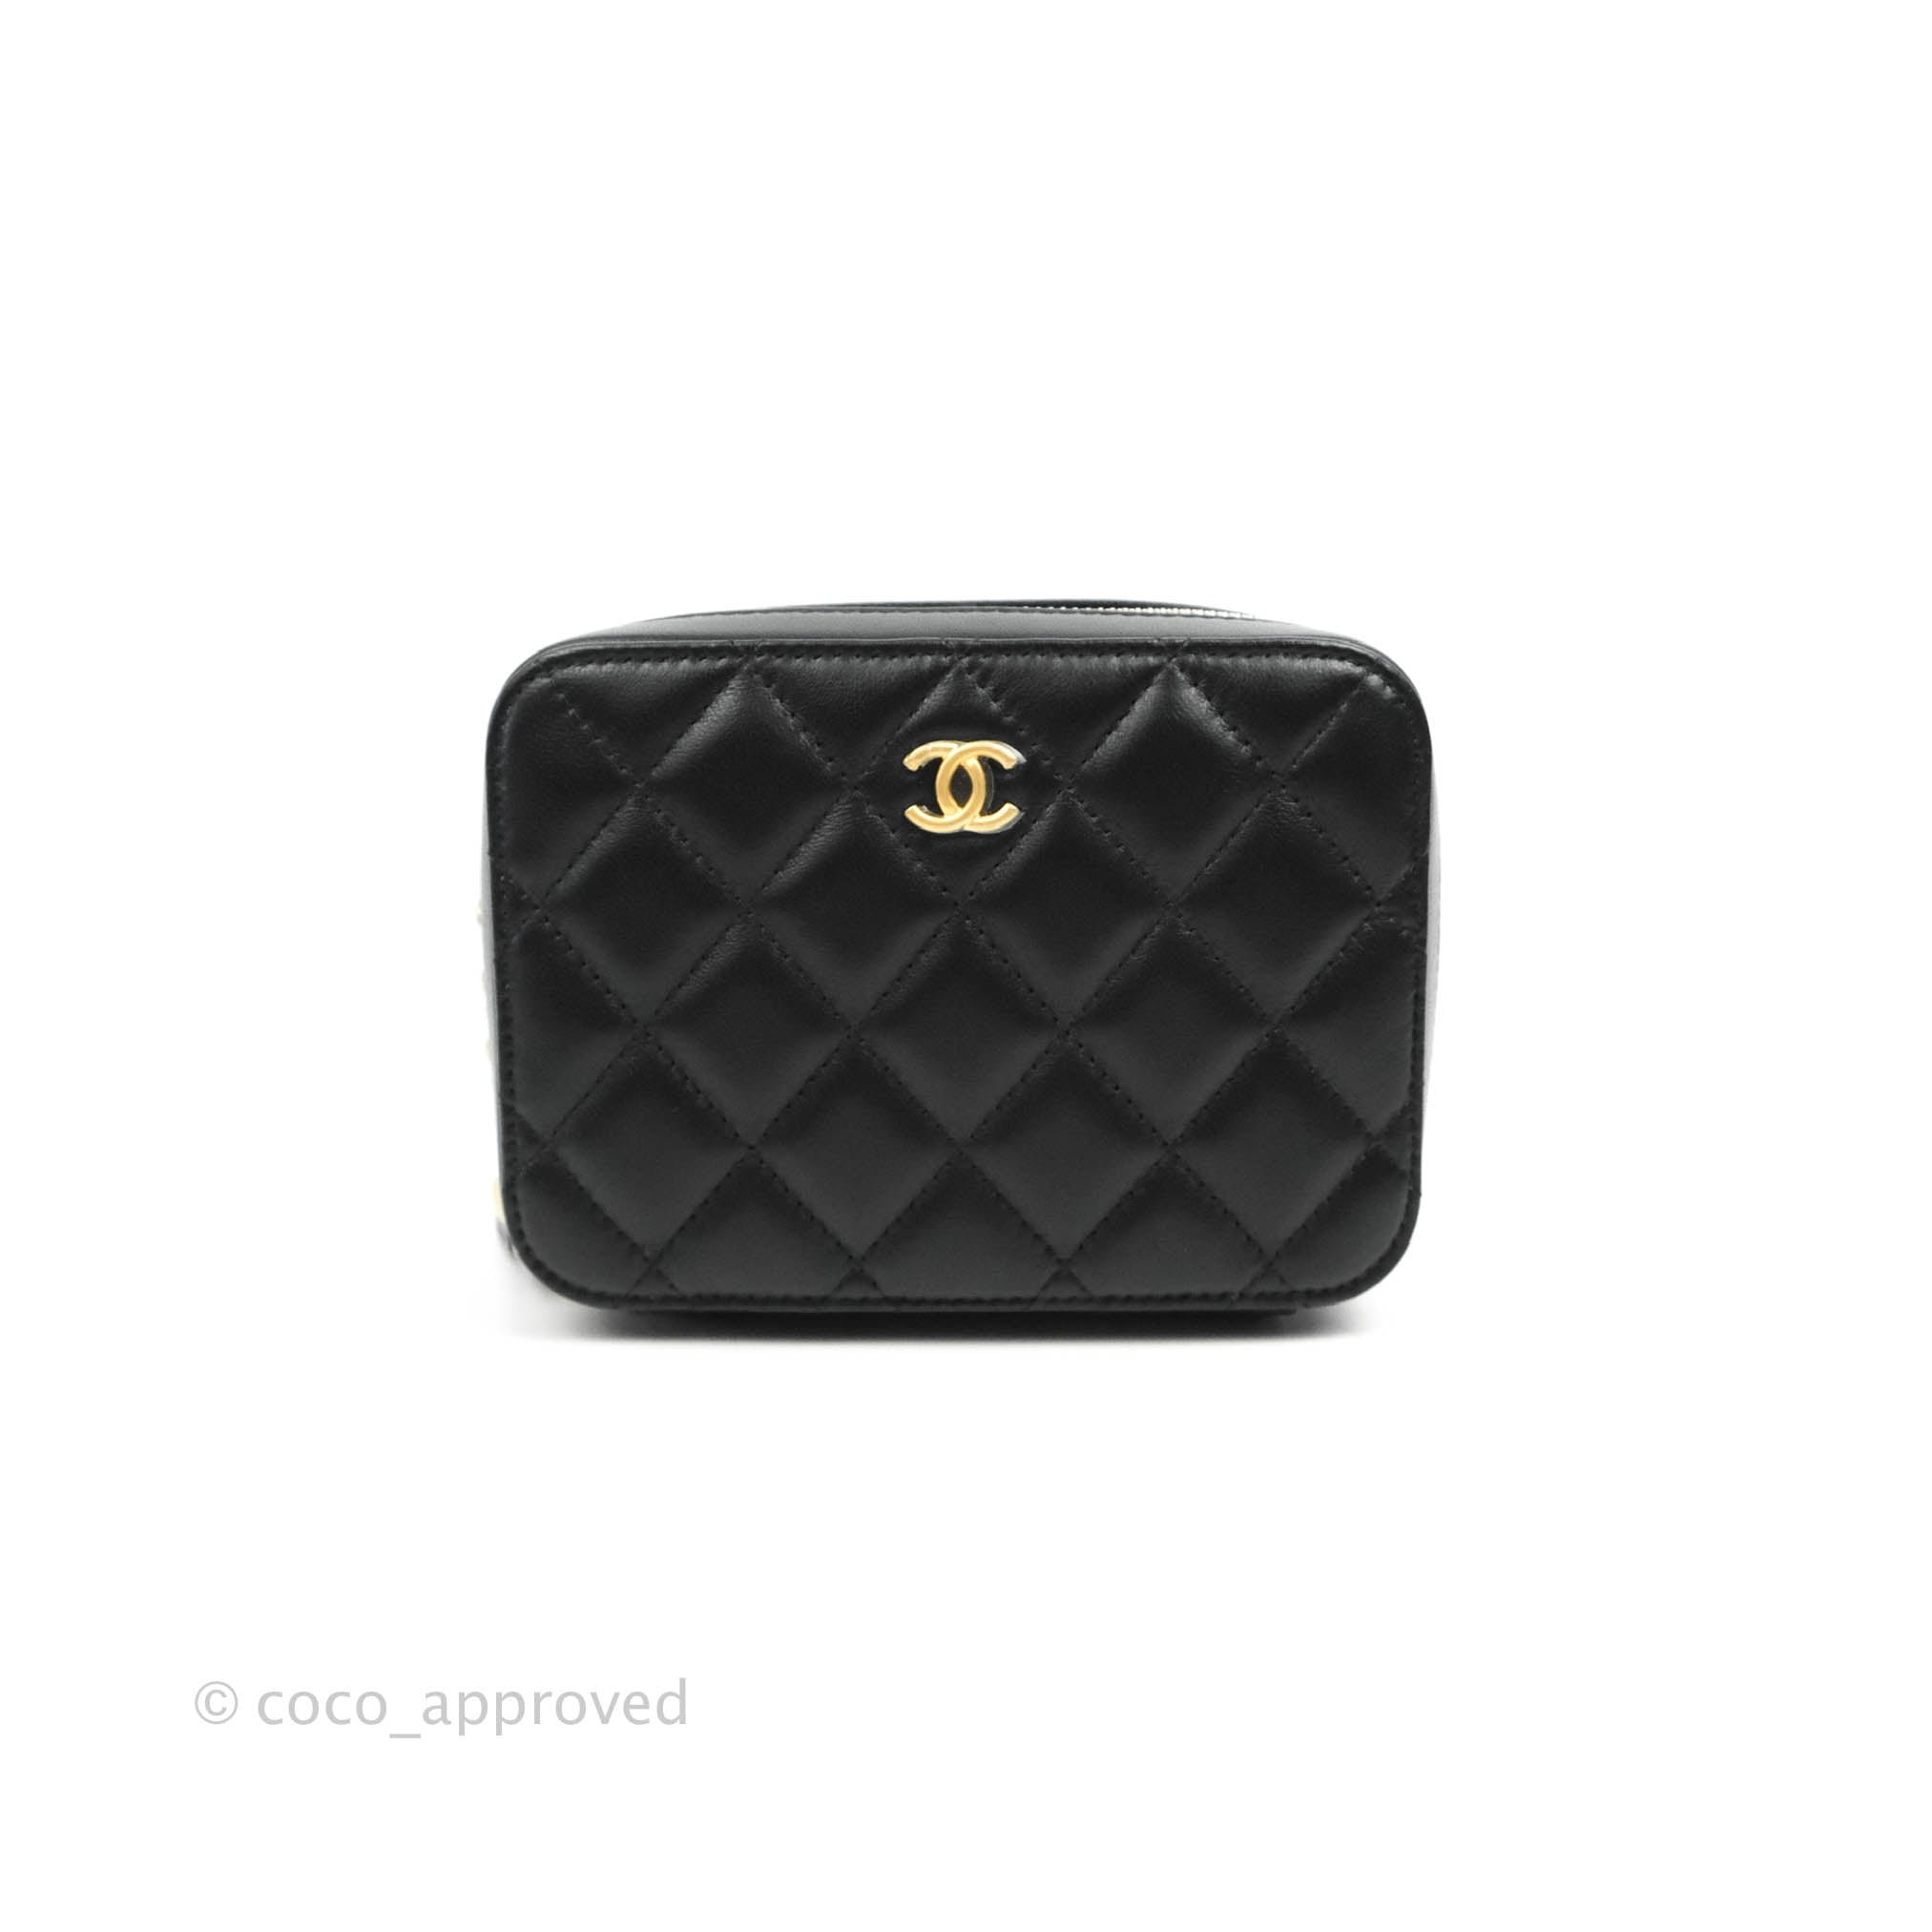 18 CHANEL bags!!, My Chanel purse collection